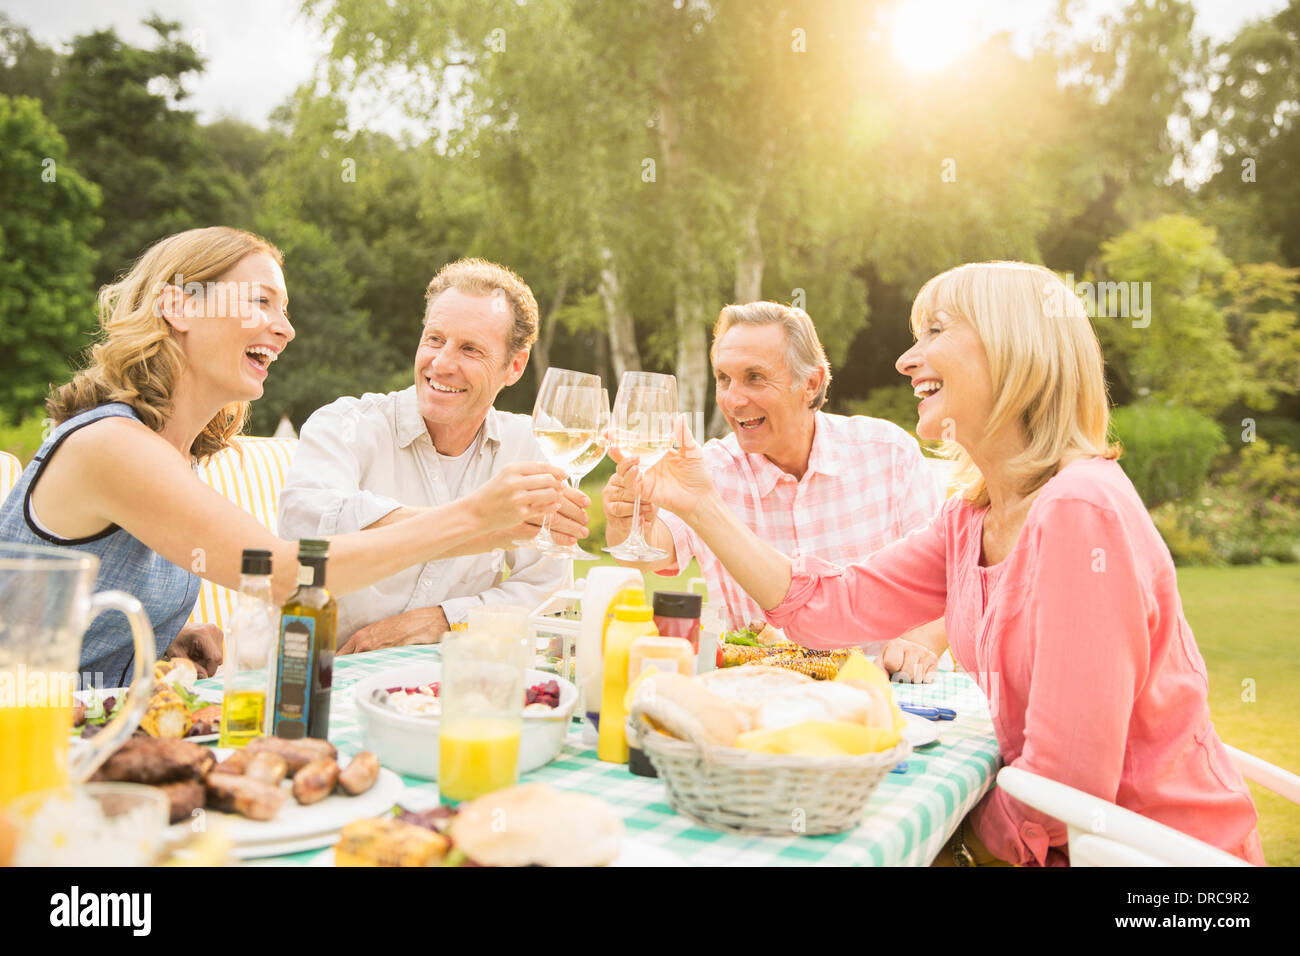 Couples toasting wine glasses at table in backyard Stock Photo